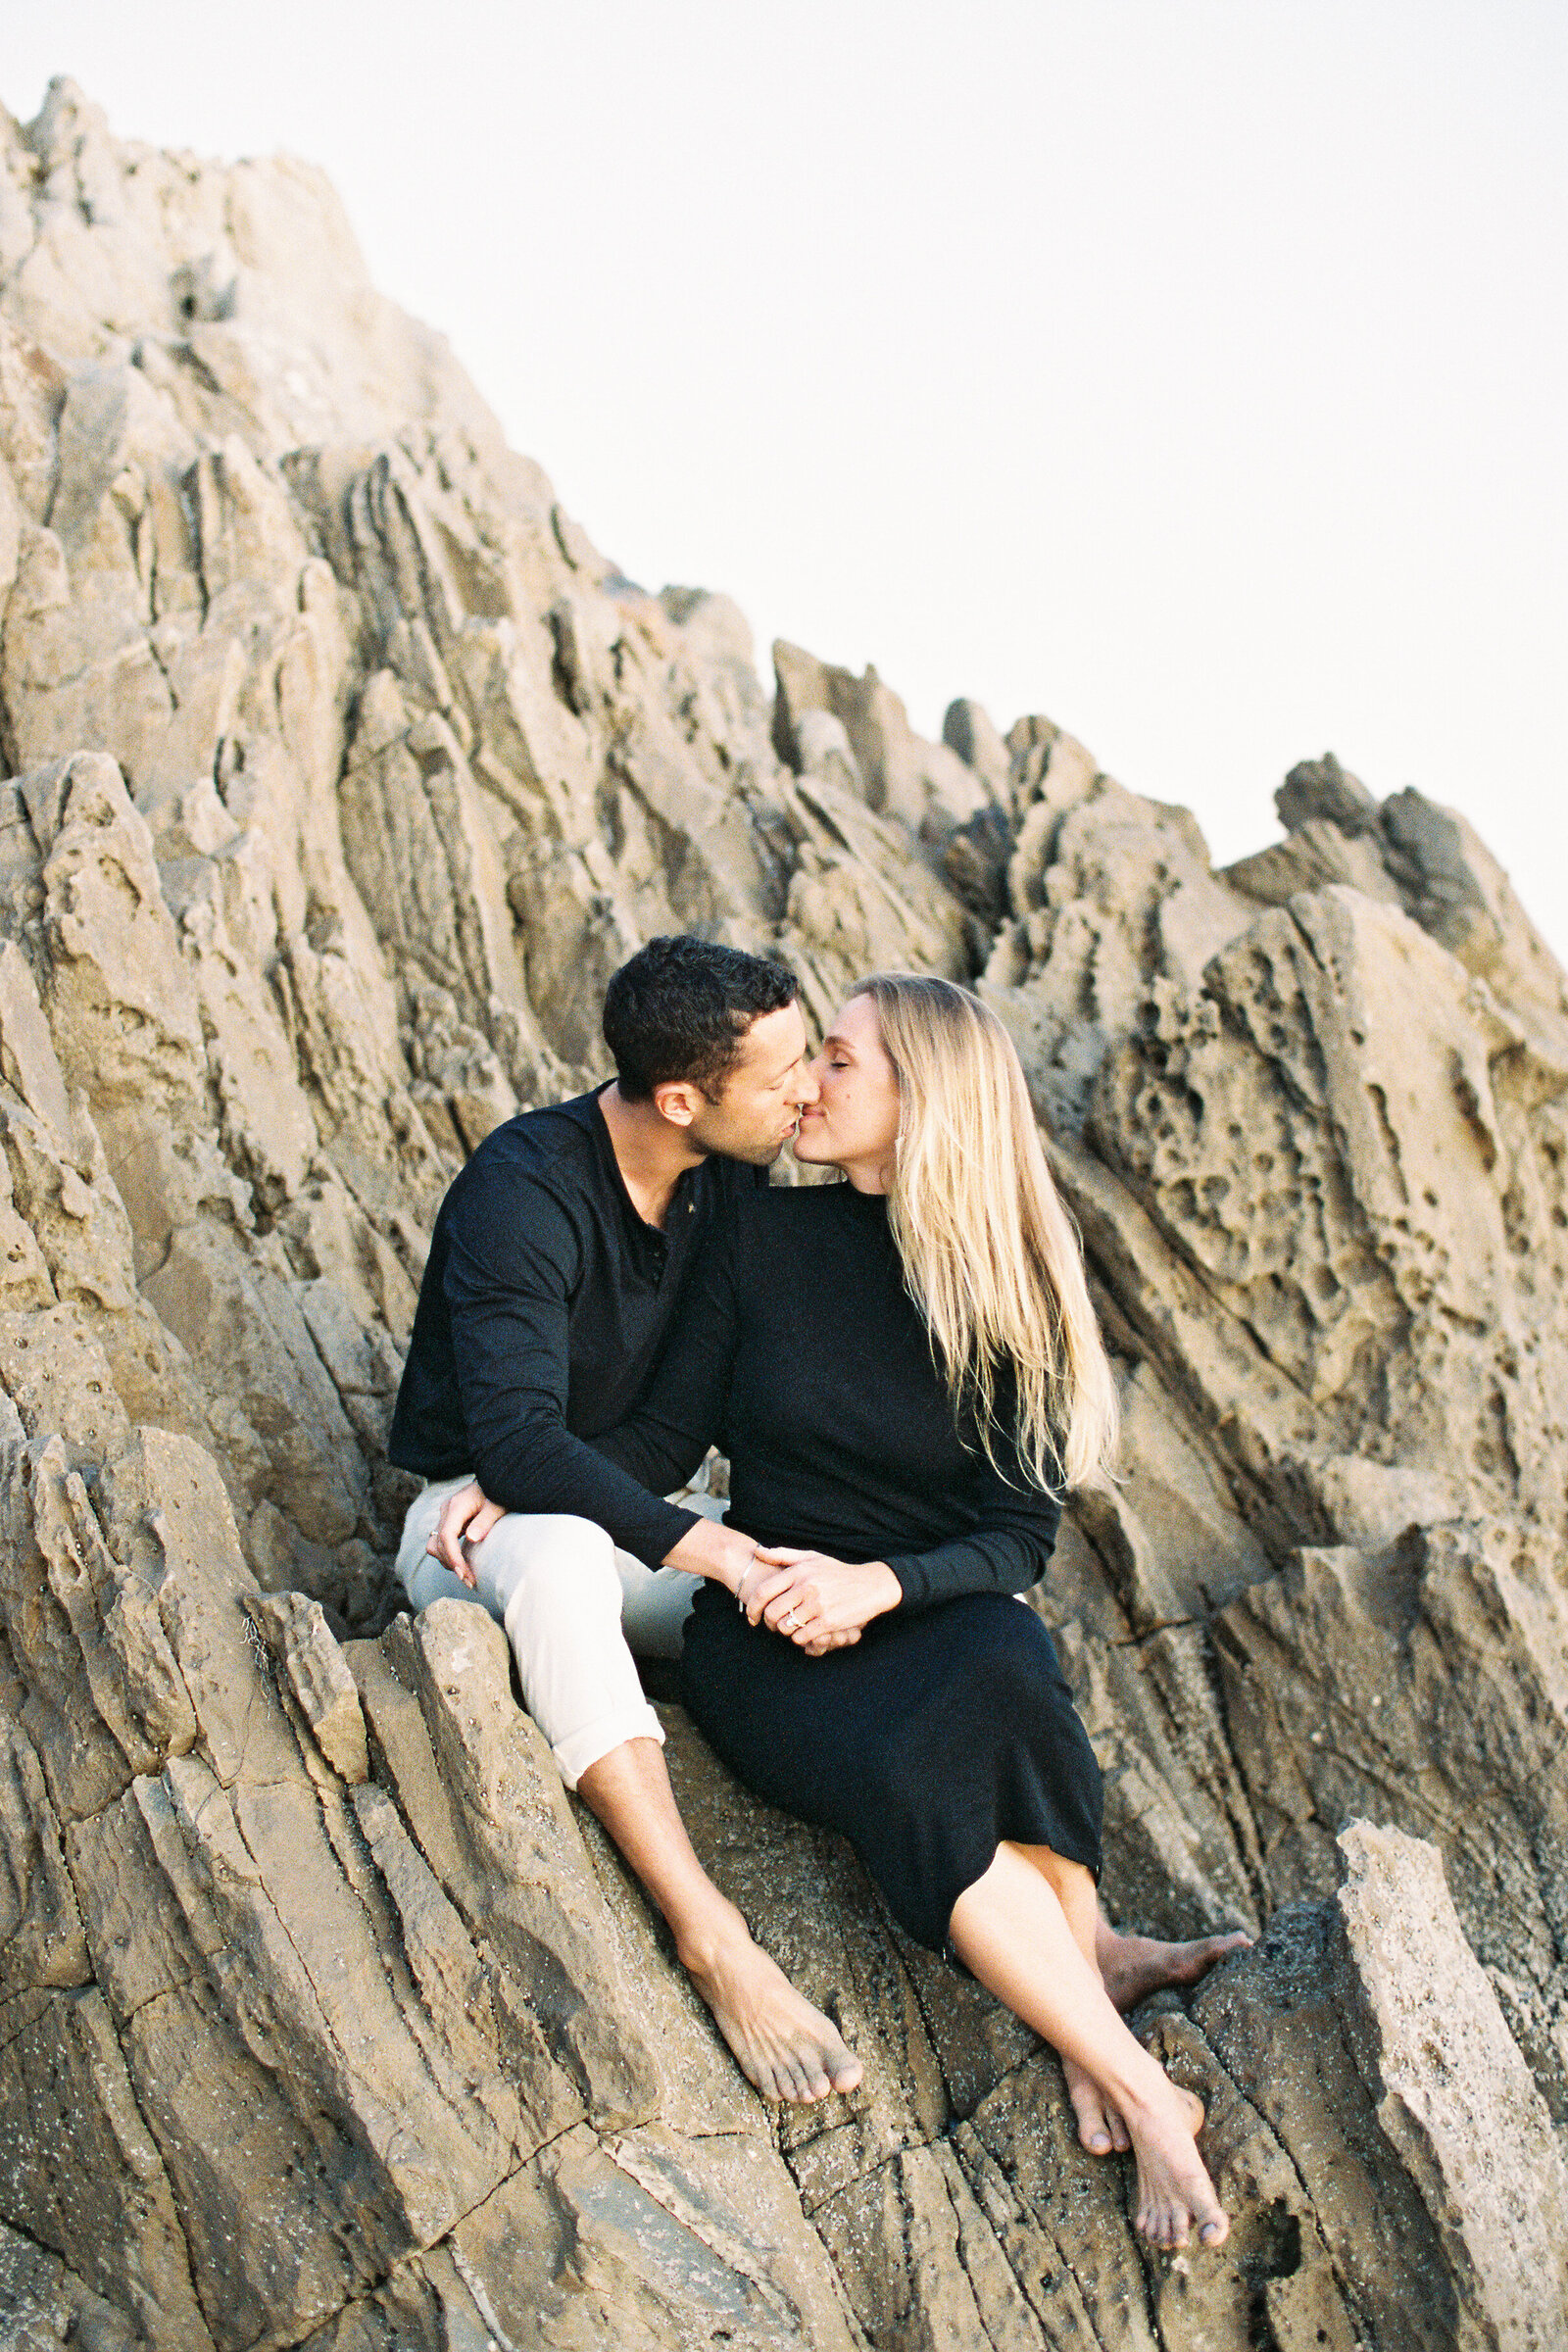 Couple sitting on rocks kissing each other.